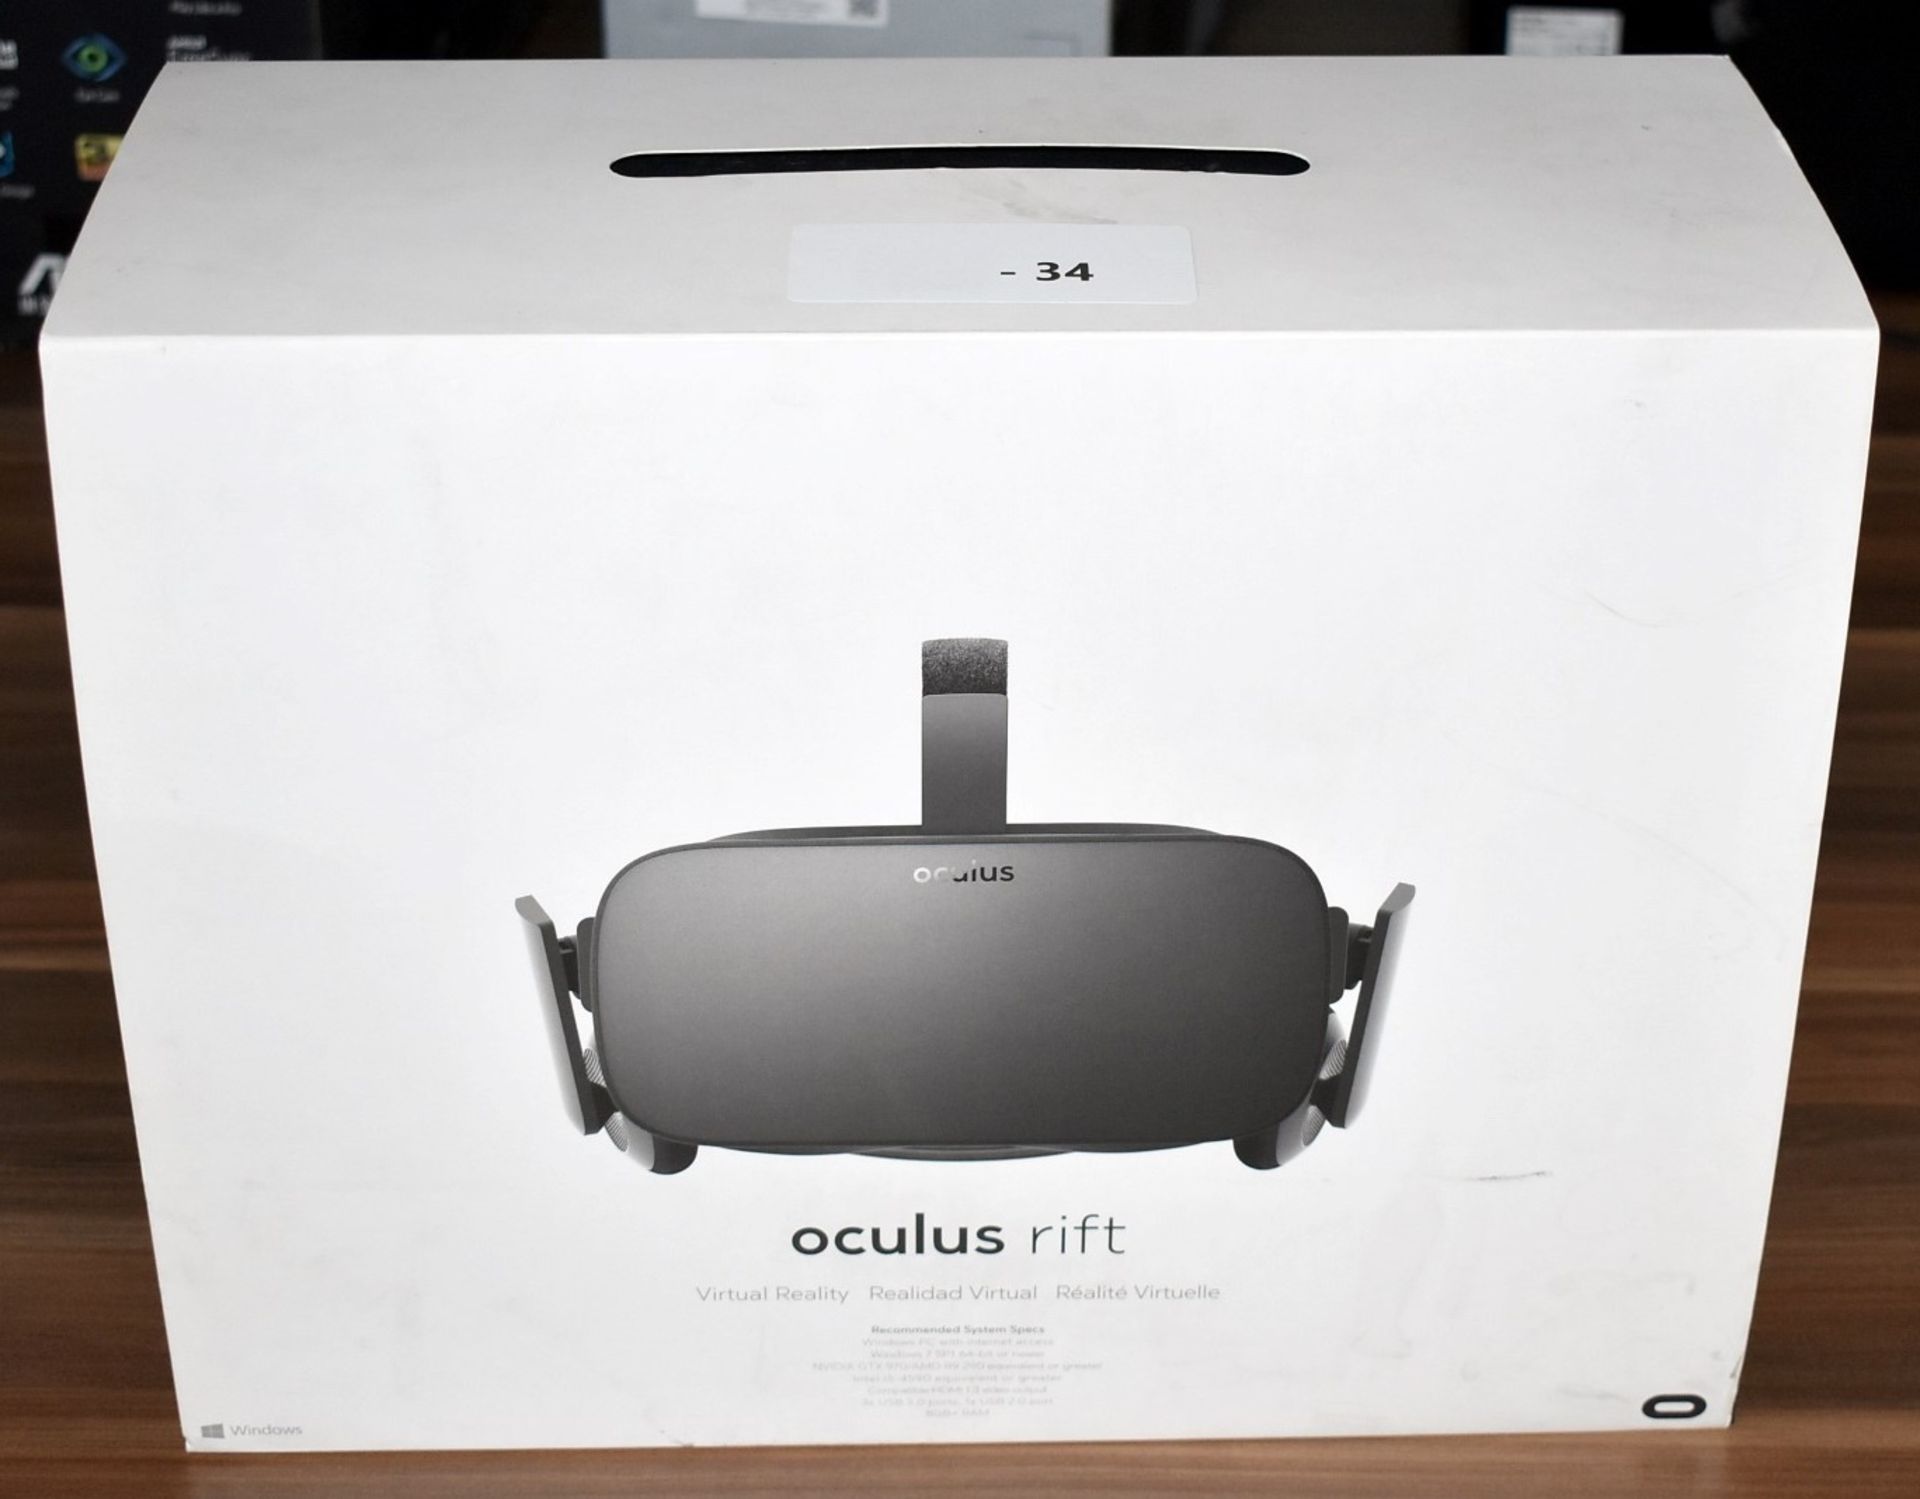 1 x Oculus Rift Virtual Reality Headset - Comes With Original Box, Xbox Controller and Accessories - Image 2 of 2